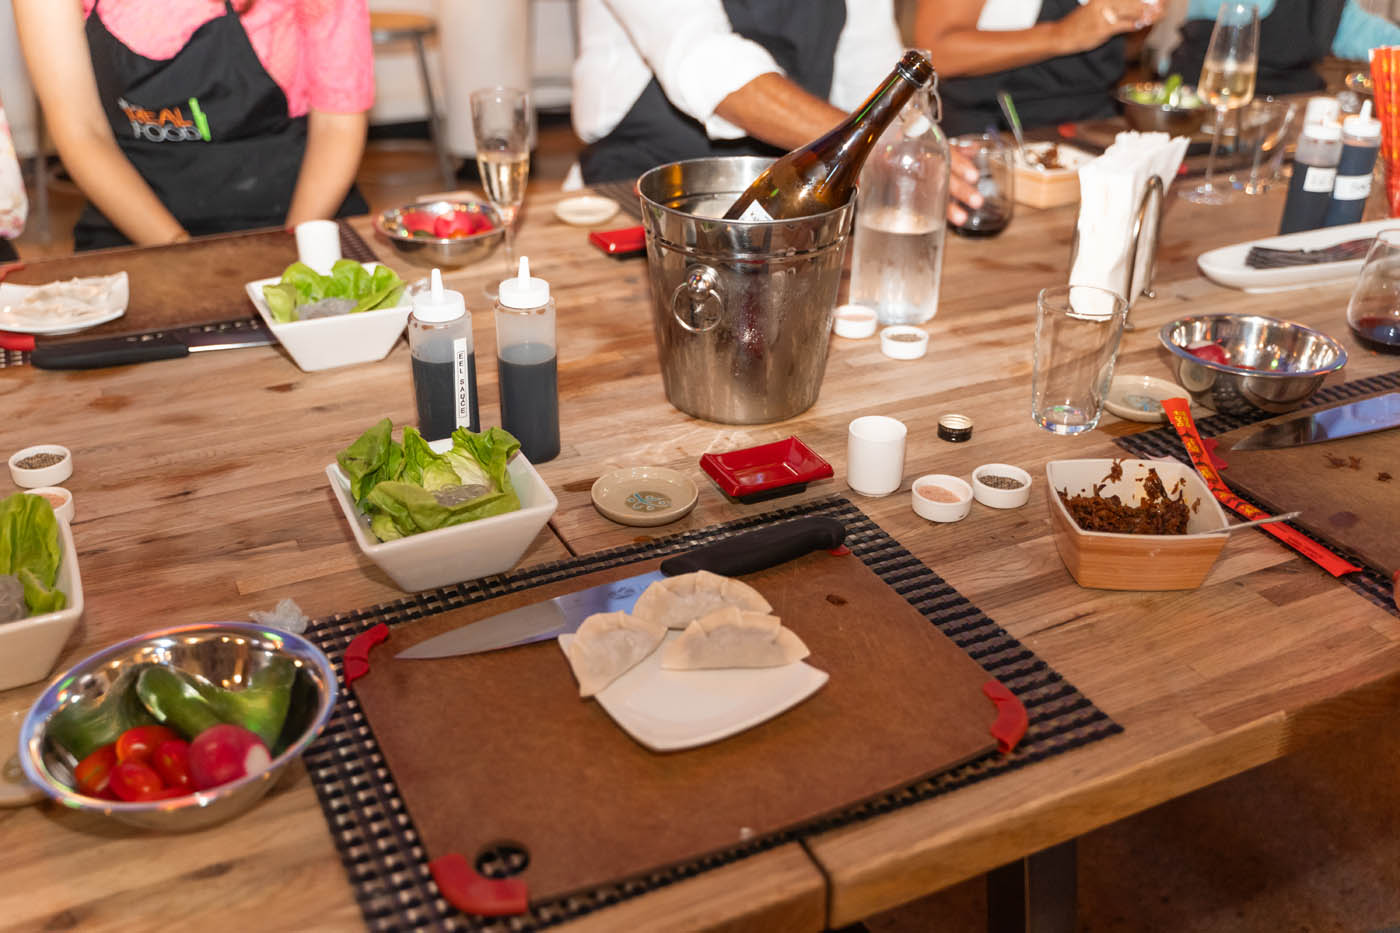 Fresh made pot stickers next to a bottle of chilled wine, try our Miami cooking classes for adults on thursdays!